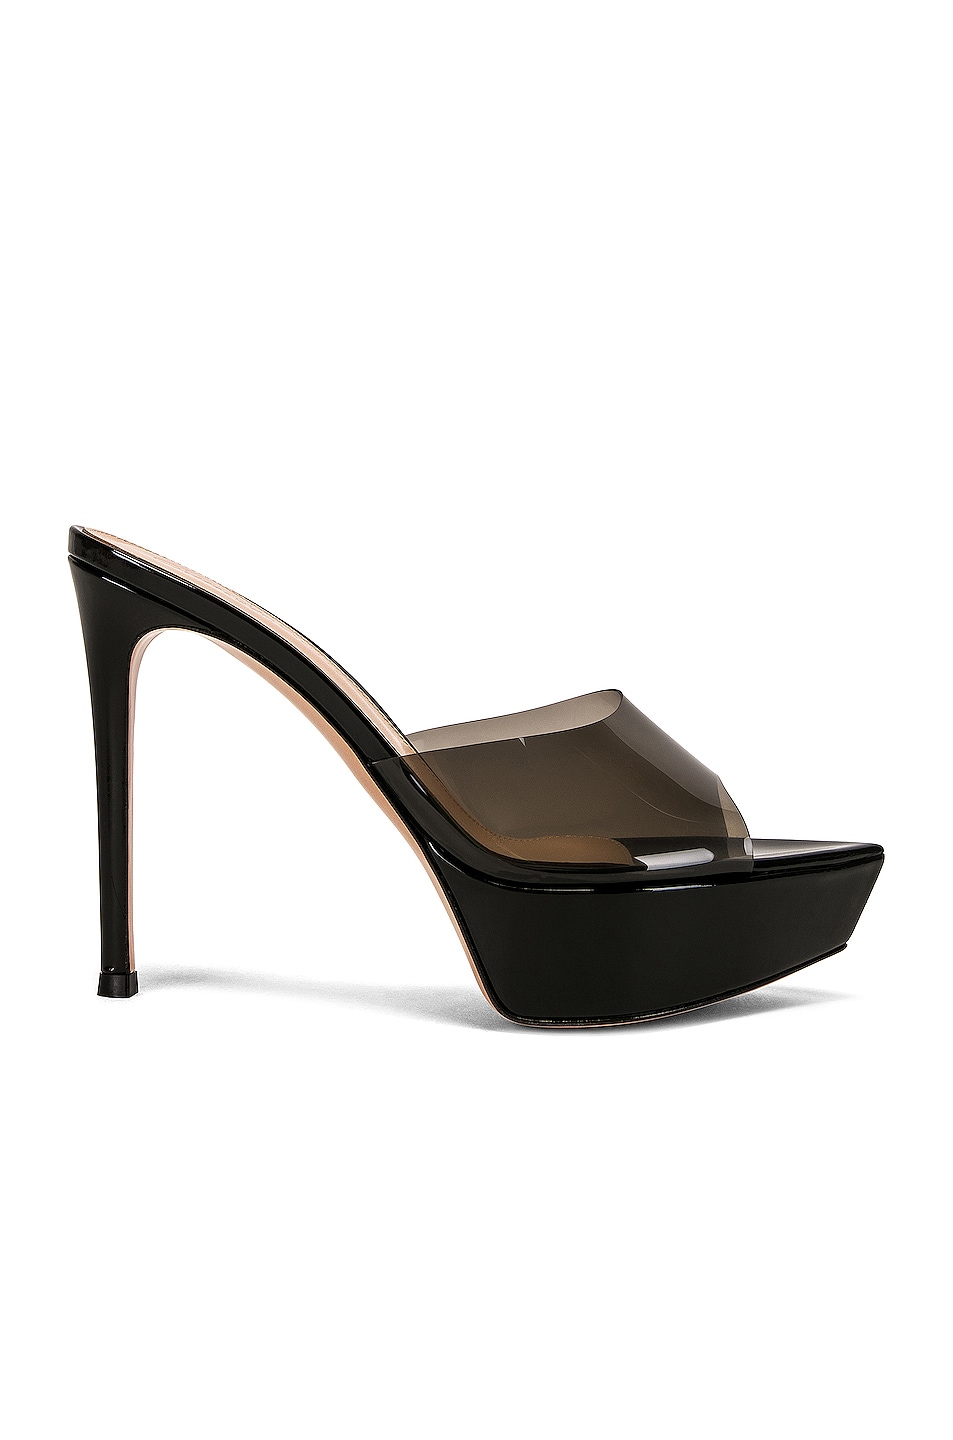 Image 1 of Gianvito Rossi Betty Platform Mules in Fume & Black